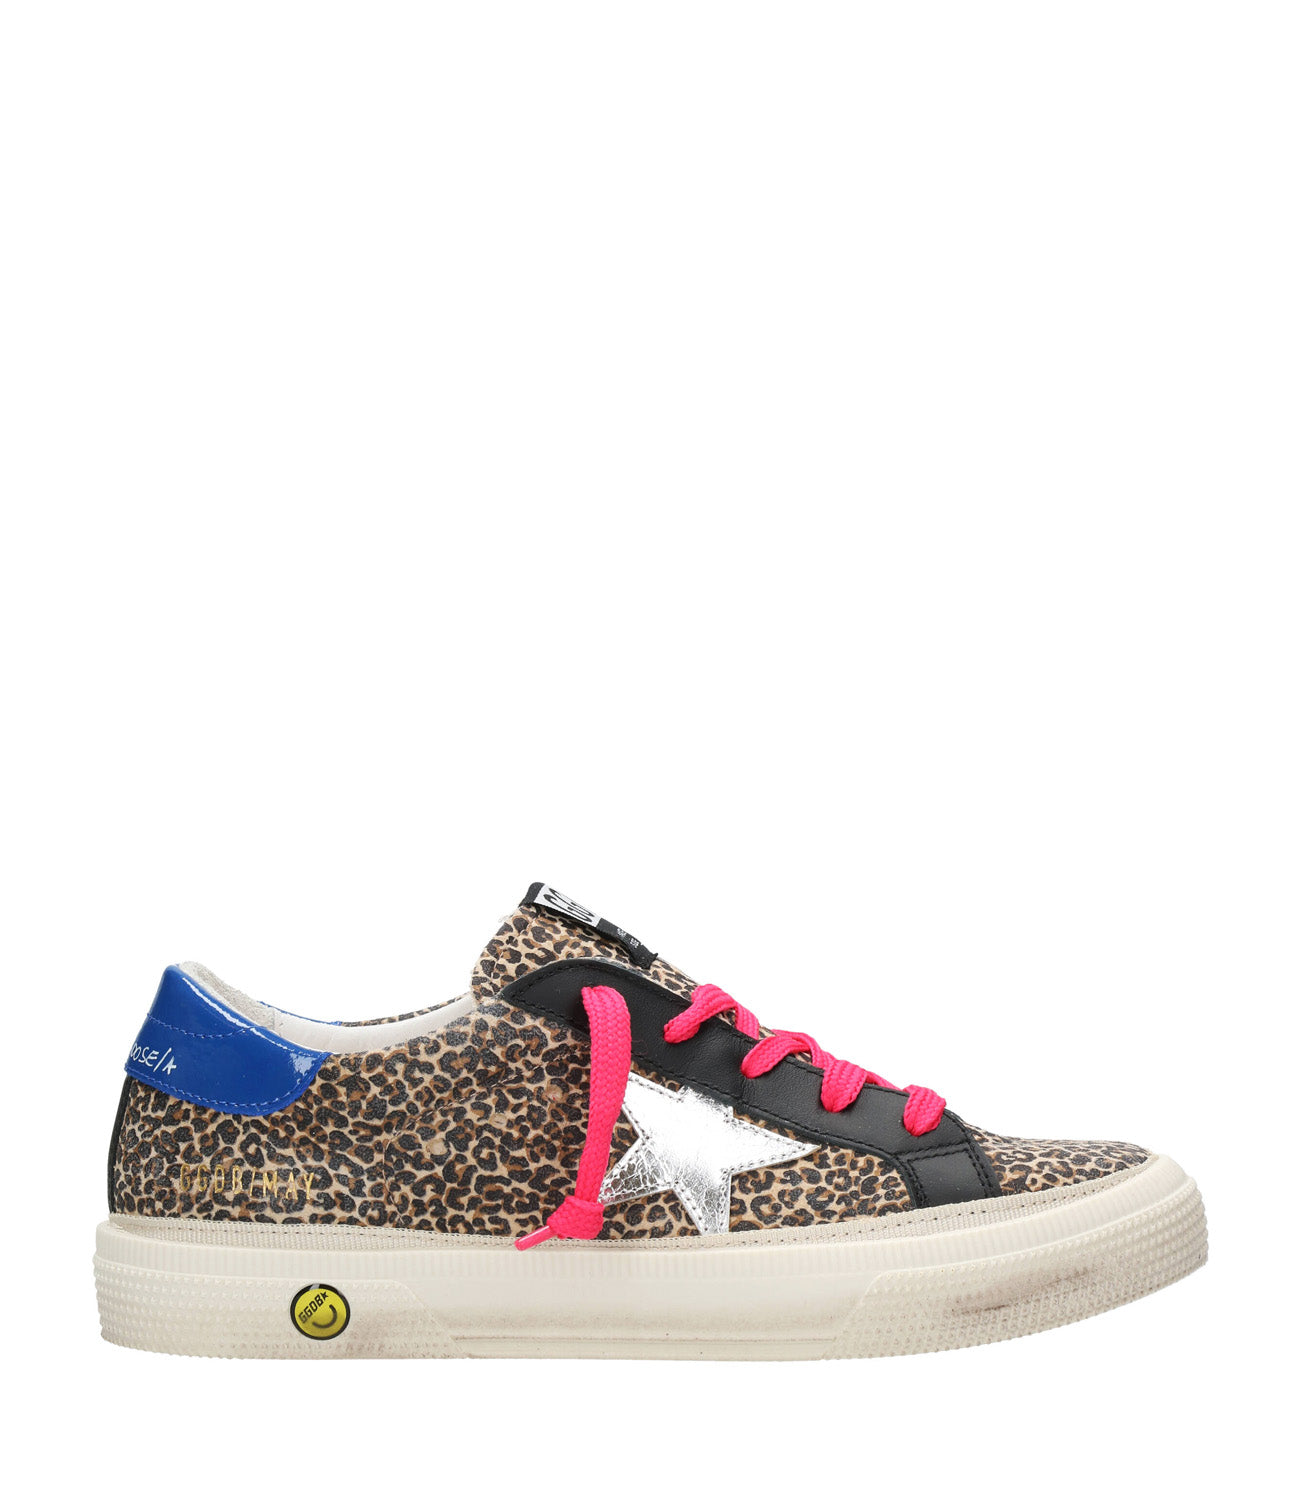 Golden Goose Deluxe Brand | Sneakers May Bronze, Brown and Turquoise